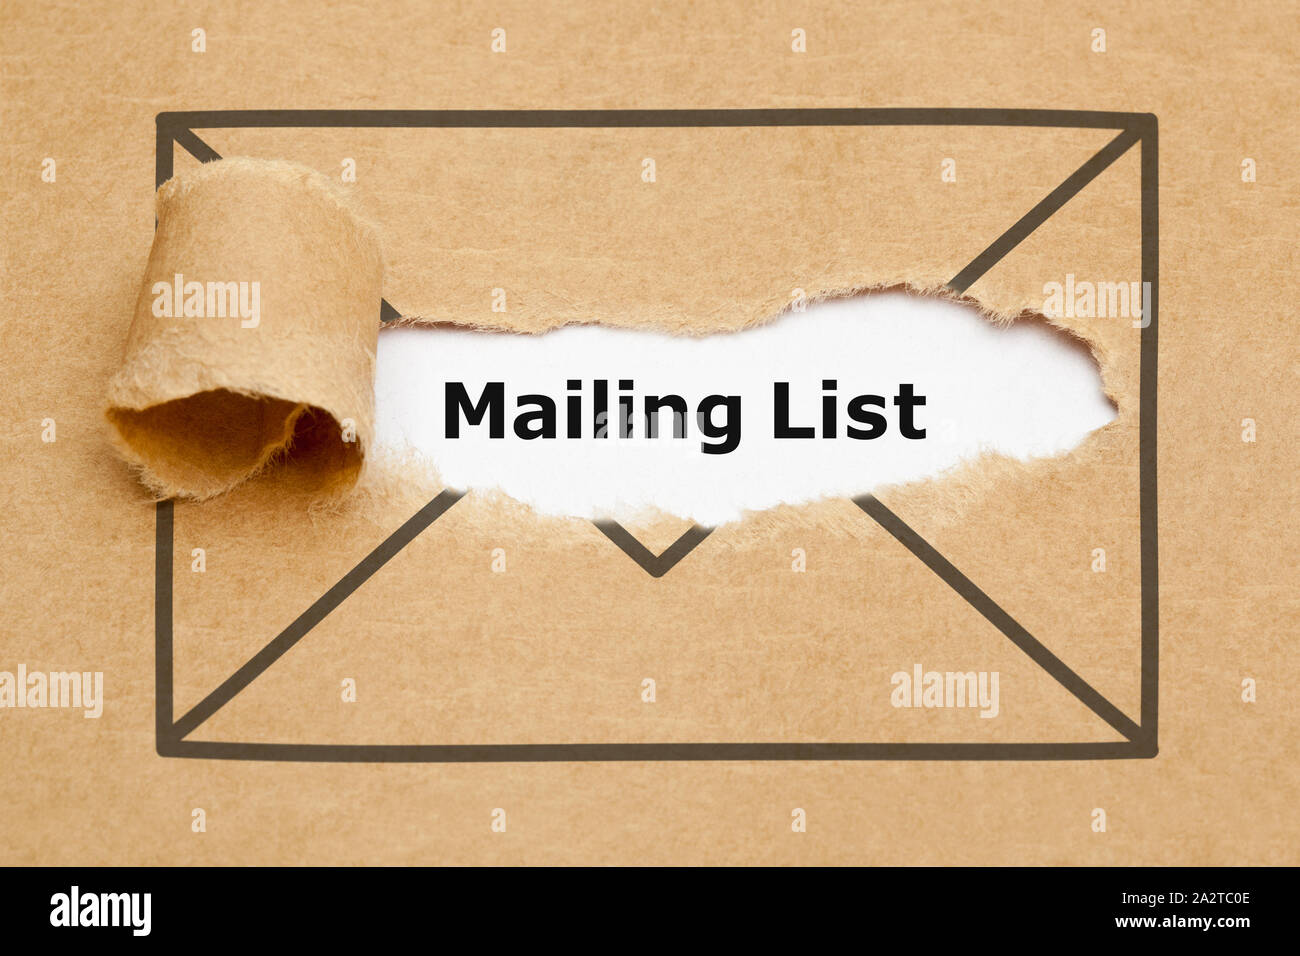 Text Mailing List appearing behind ripped brown paper in letter envelope drawing. Stock Photo